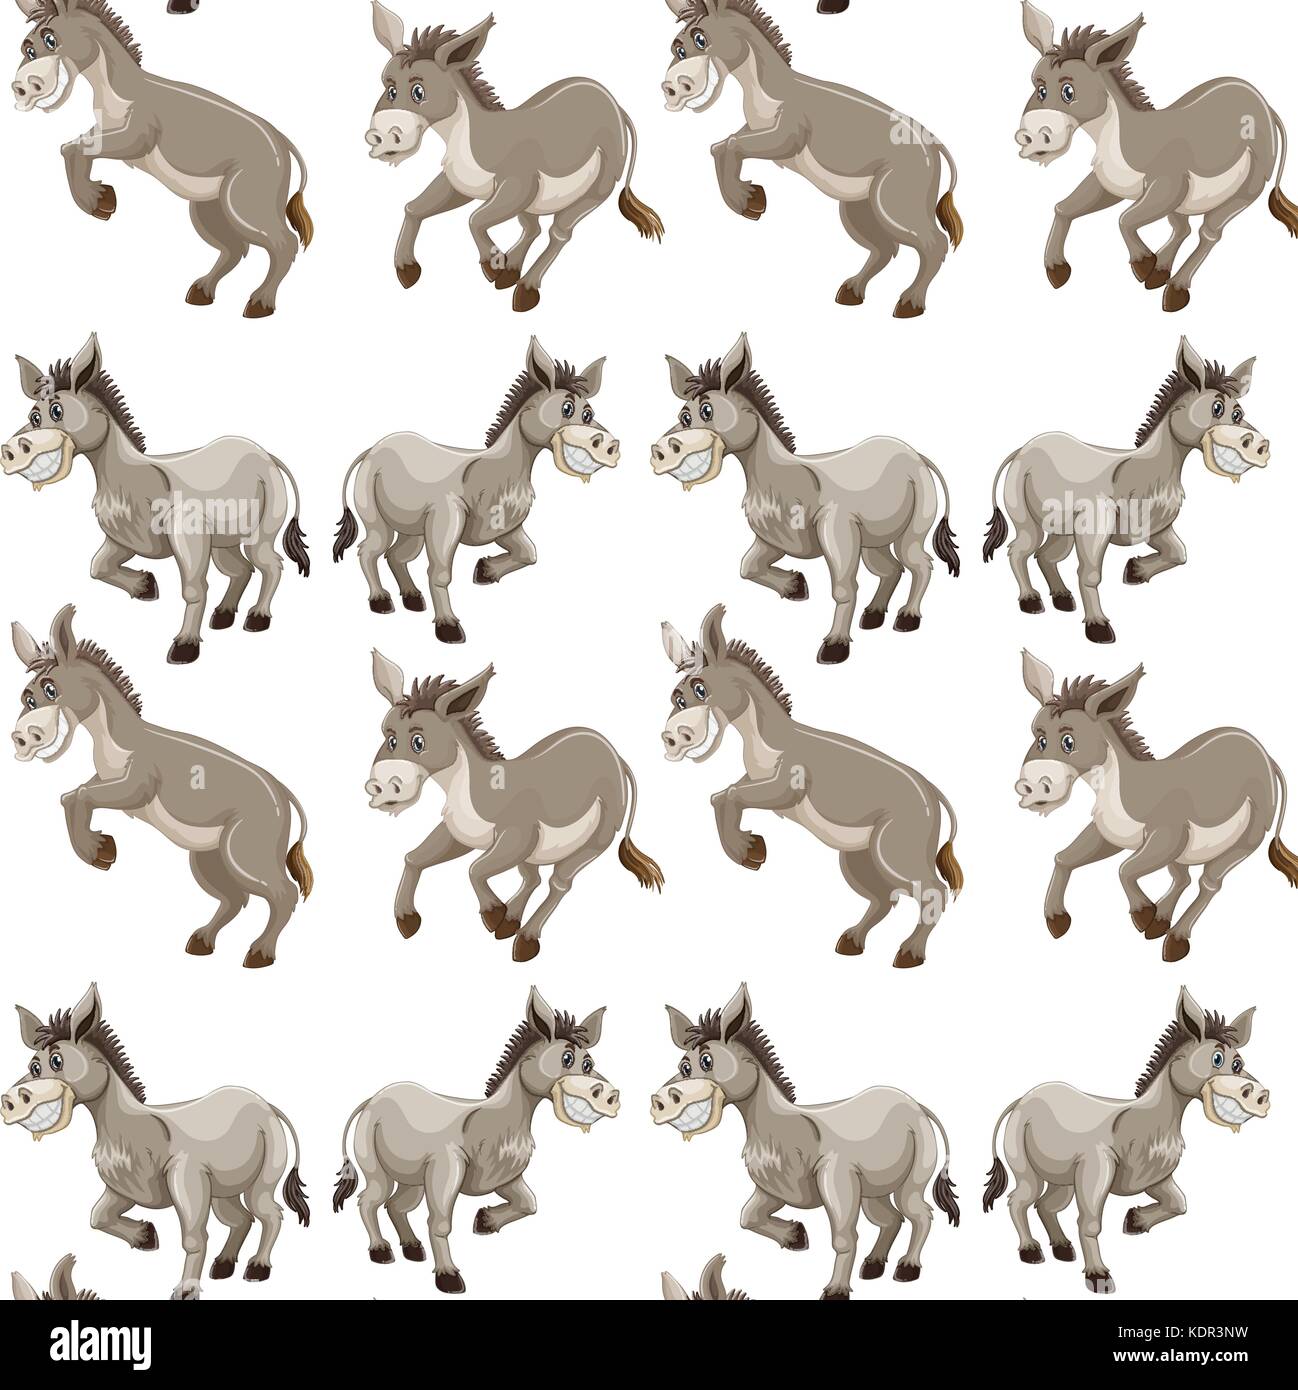 Seamless background design with gray donkeys illustration Stock Vector ...